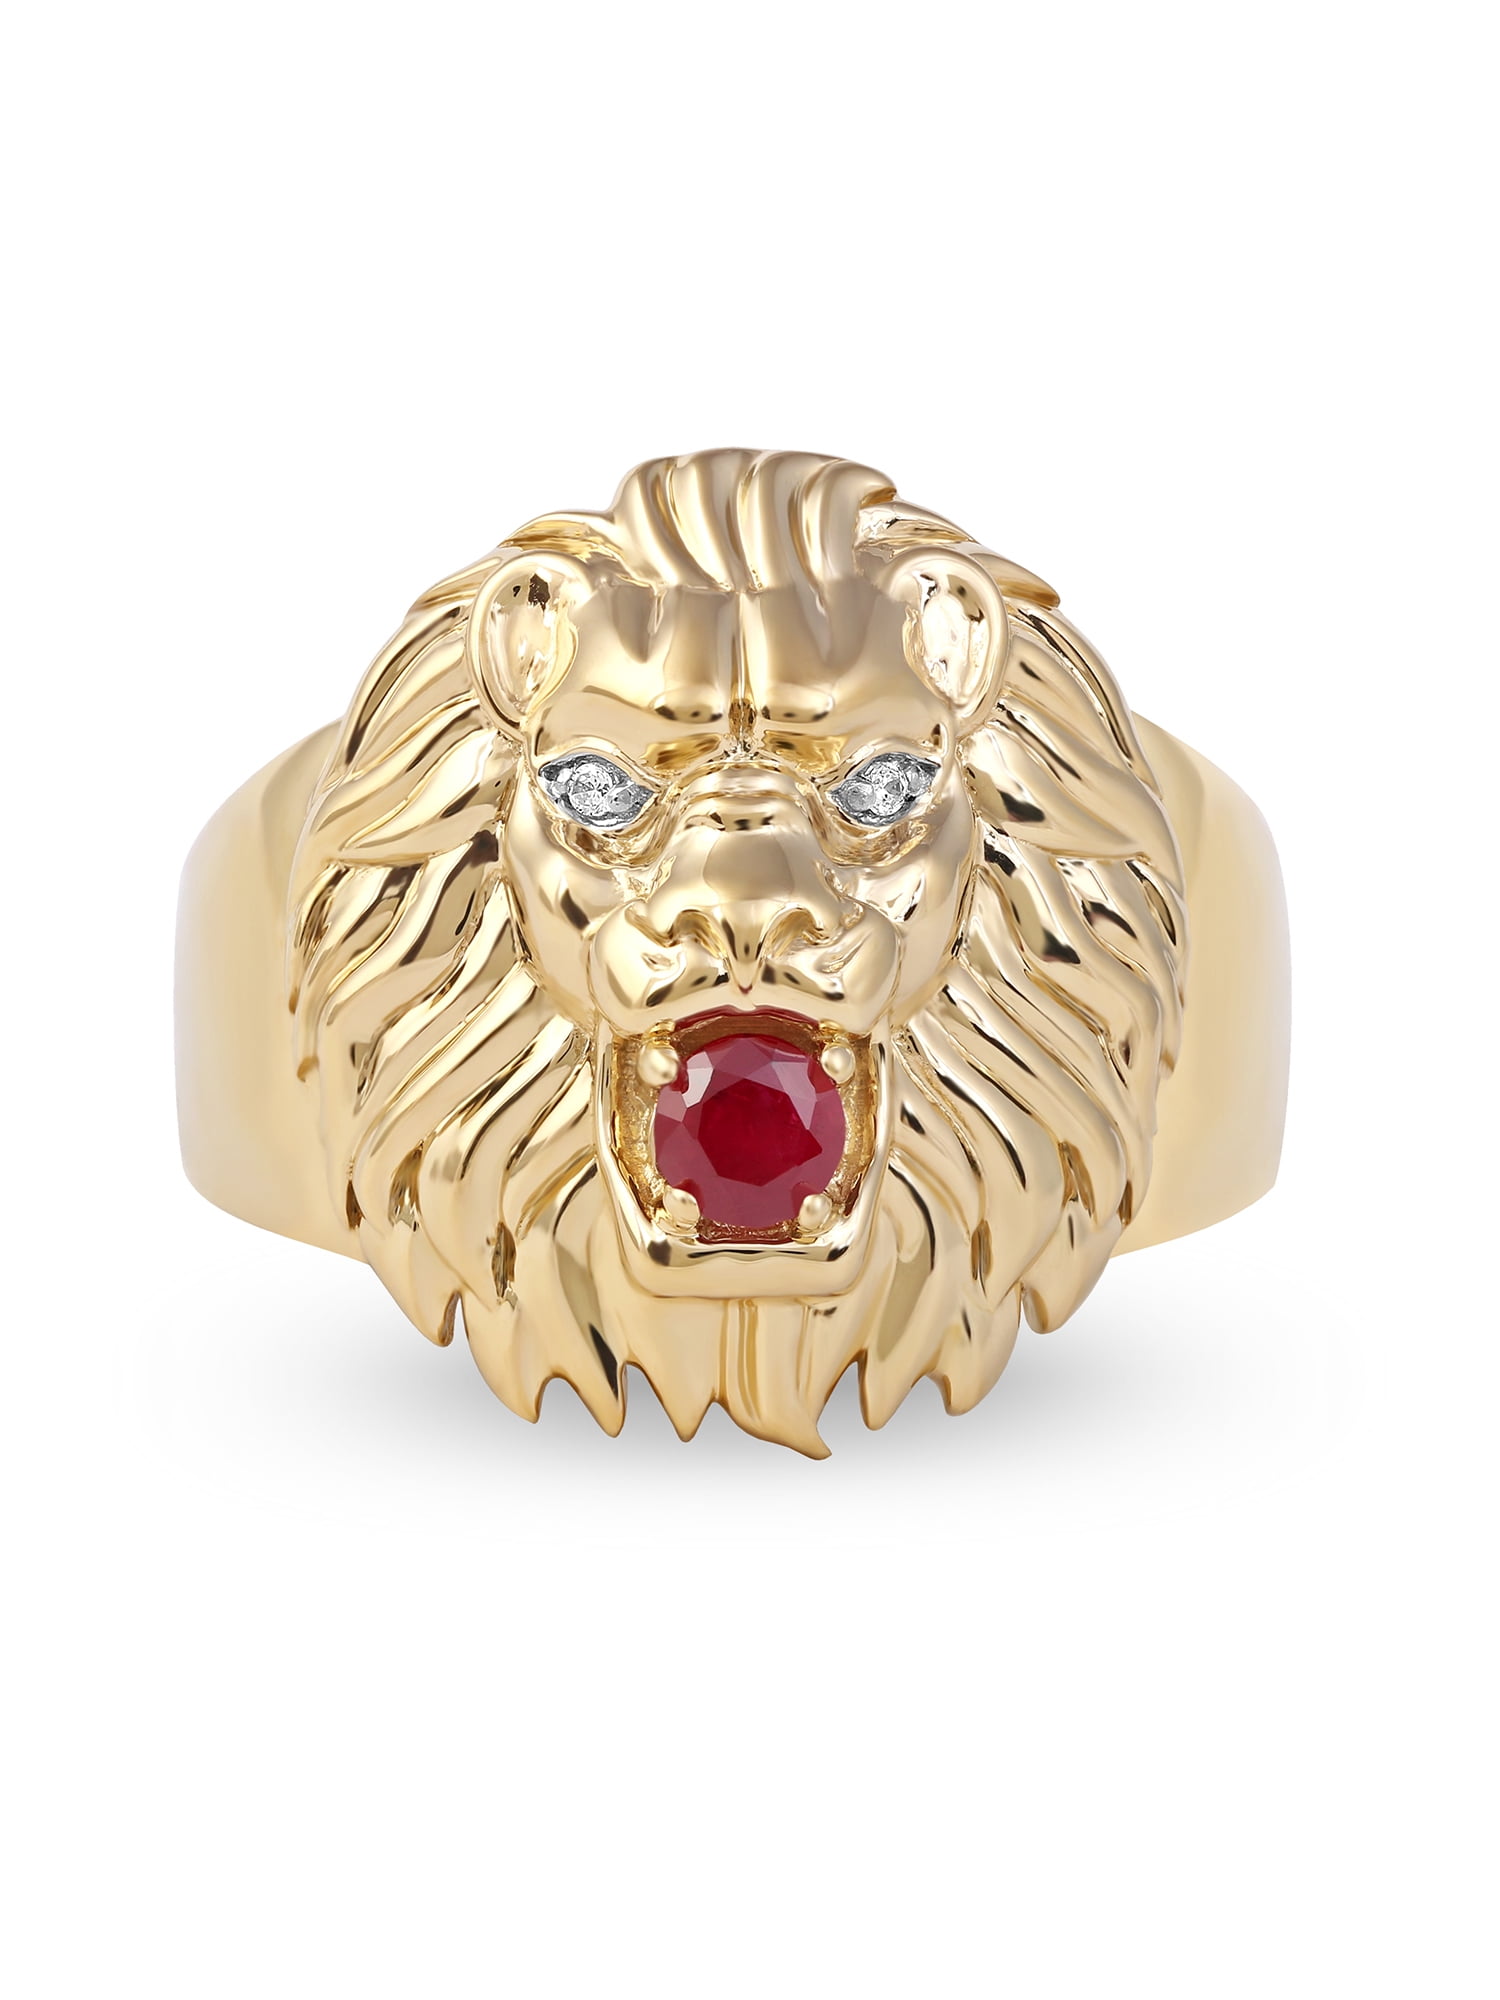 14k Yellow Gold Lion's Head Hand Carved Ring #101511 - Seattle Bellevue |  Joseph Jewelry